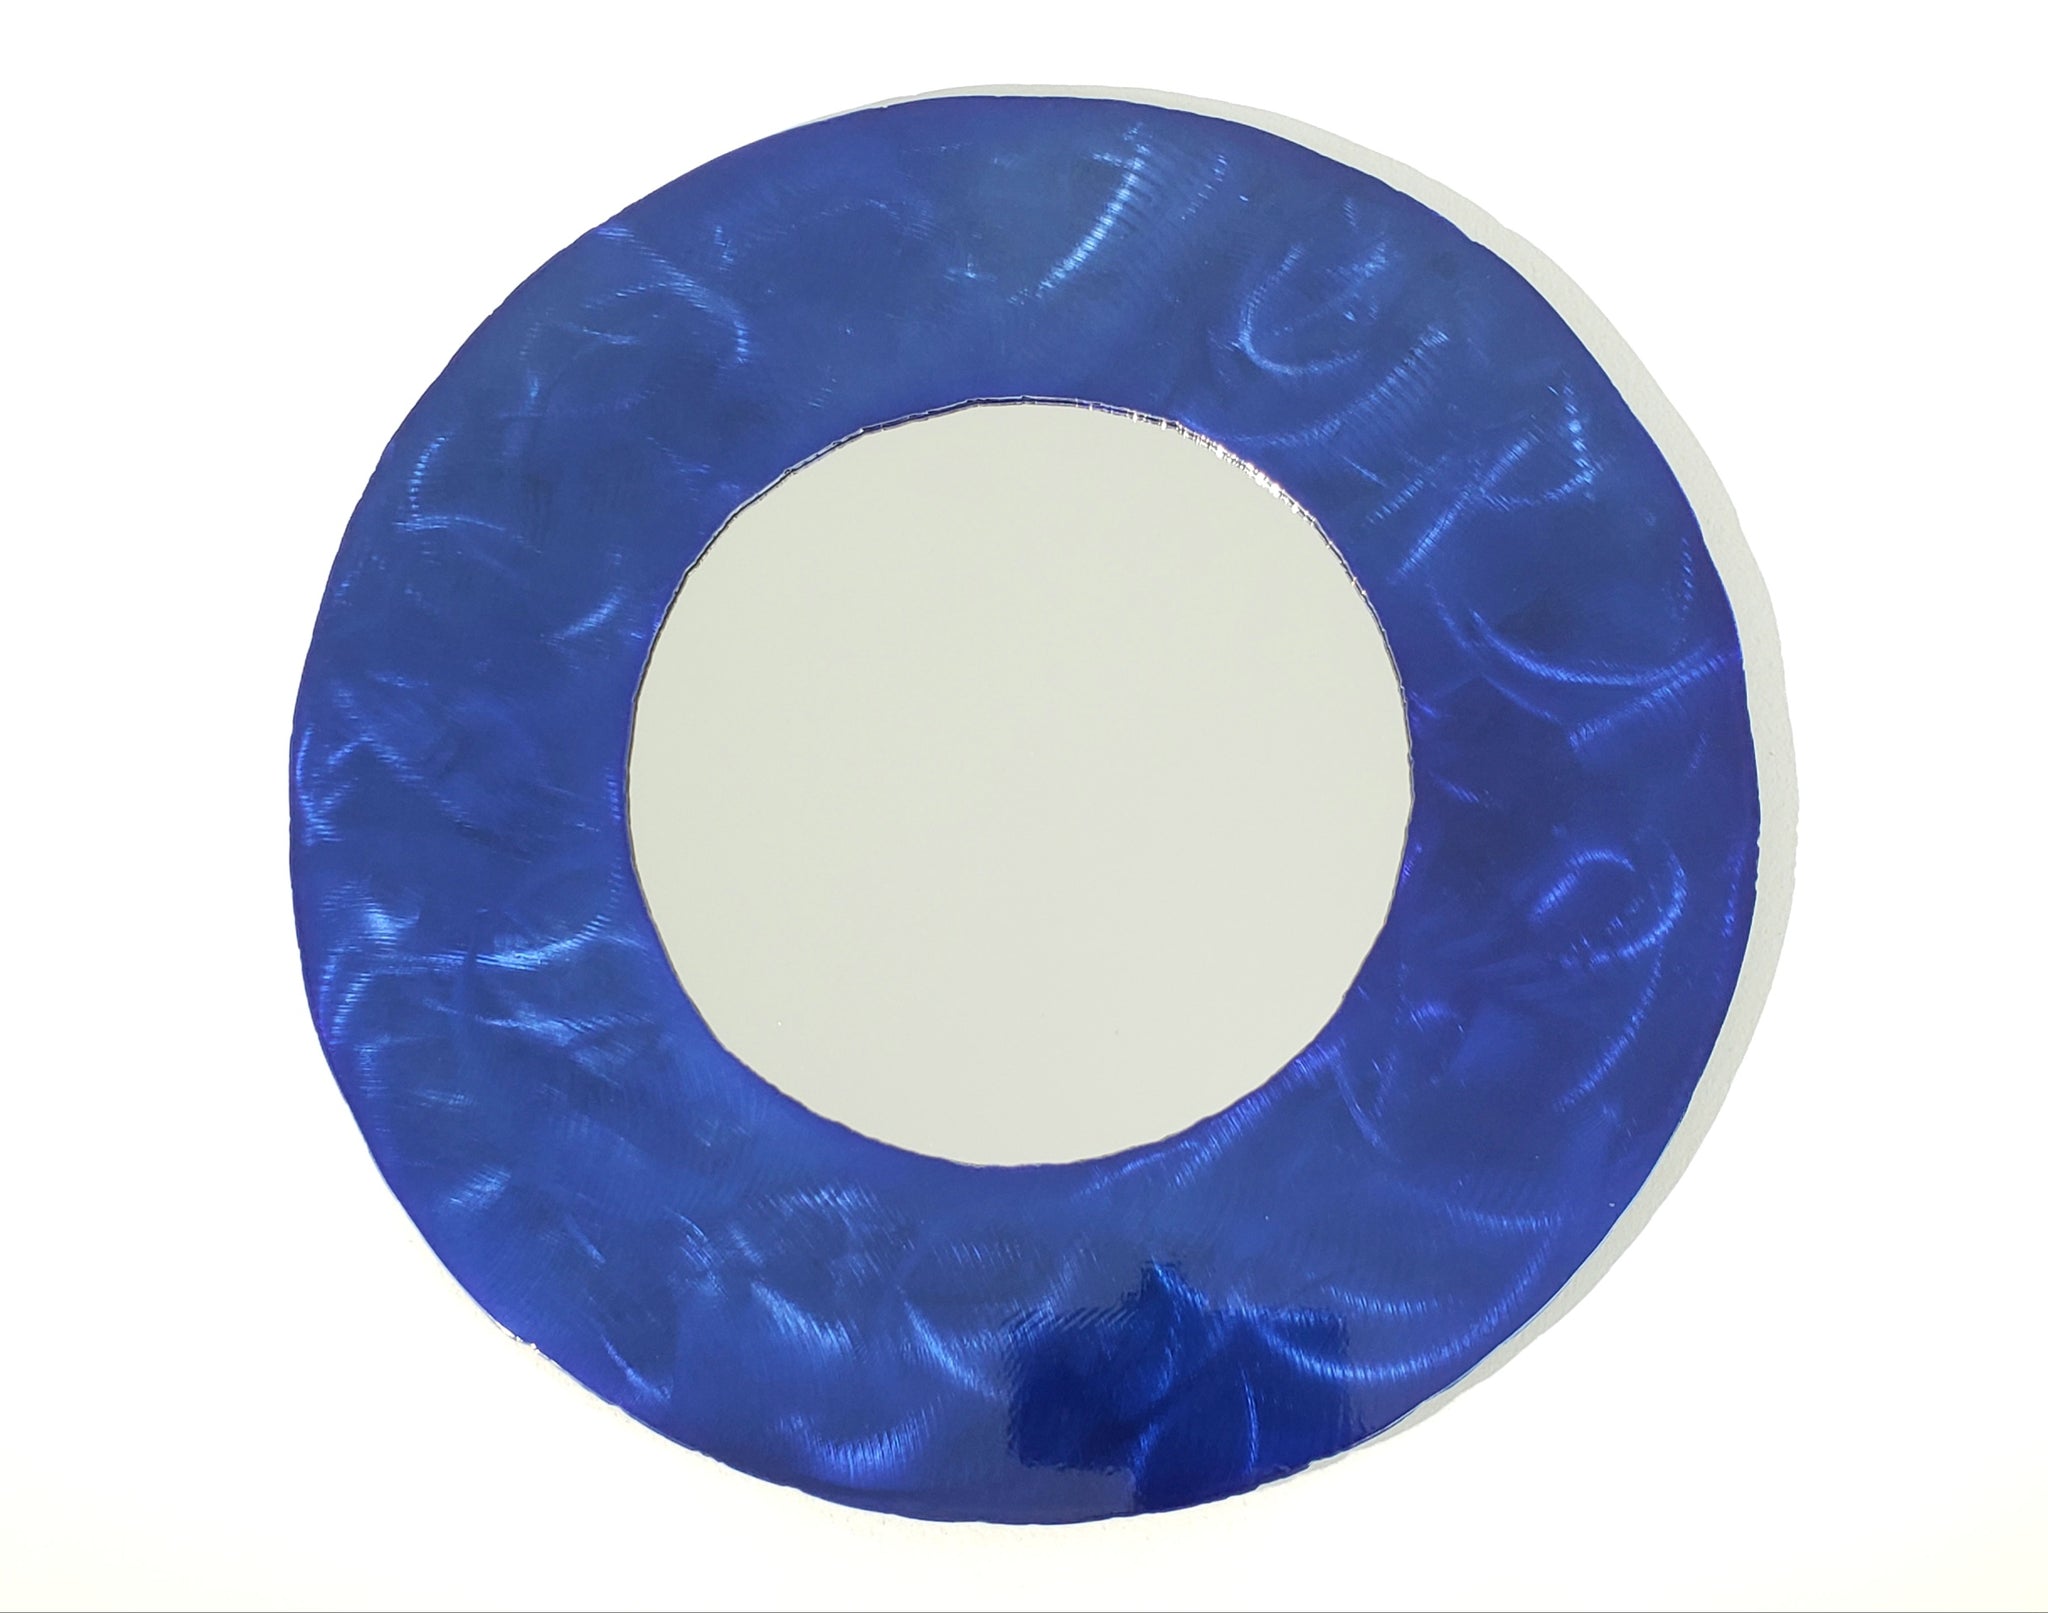 15" Steel Frame Mirror with Blueberry Finish. Vibrant Colorful Wall Accent.